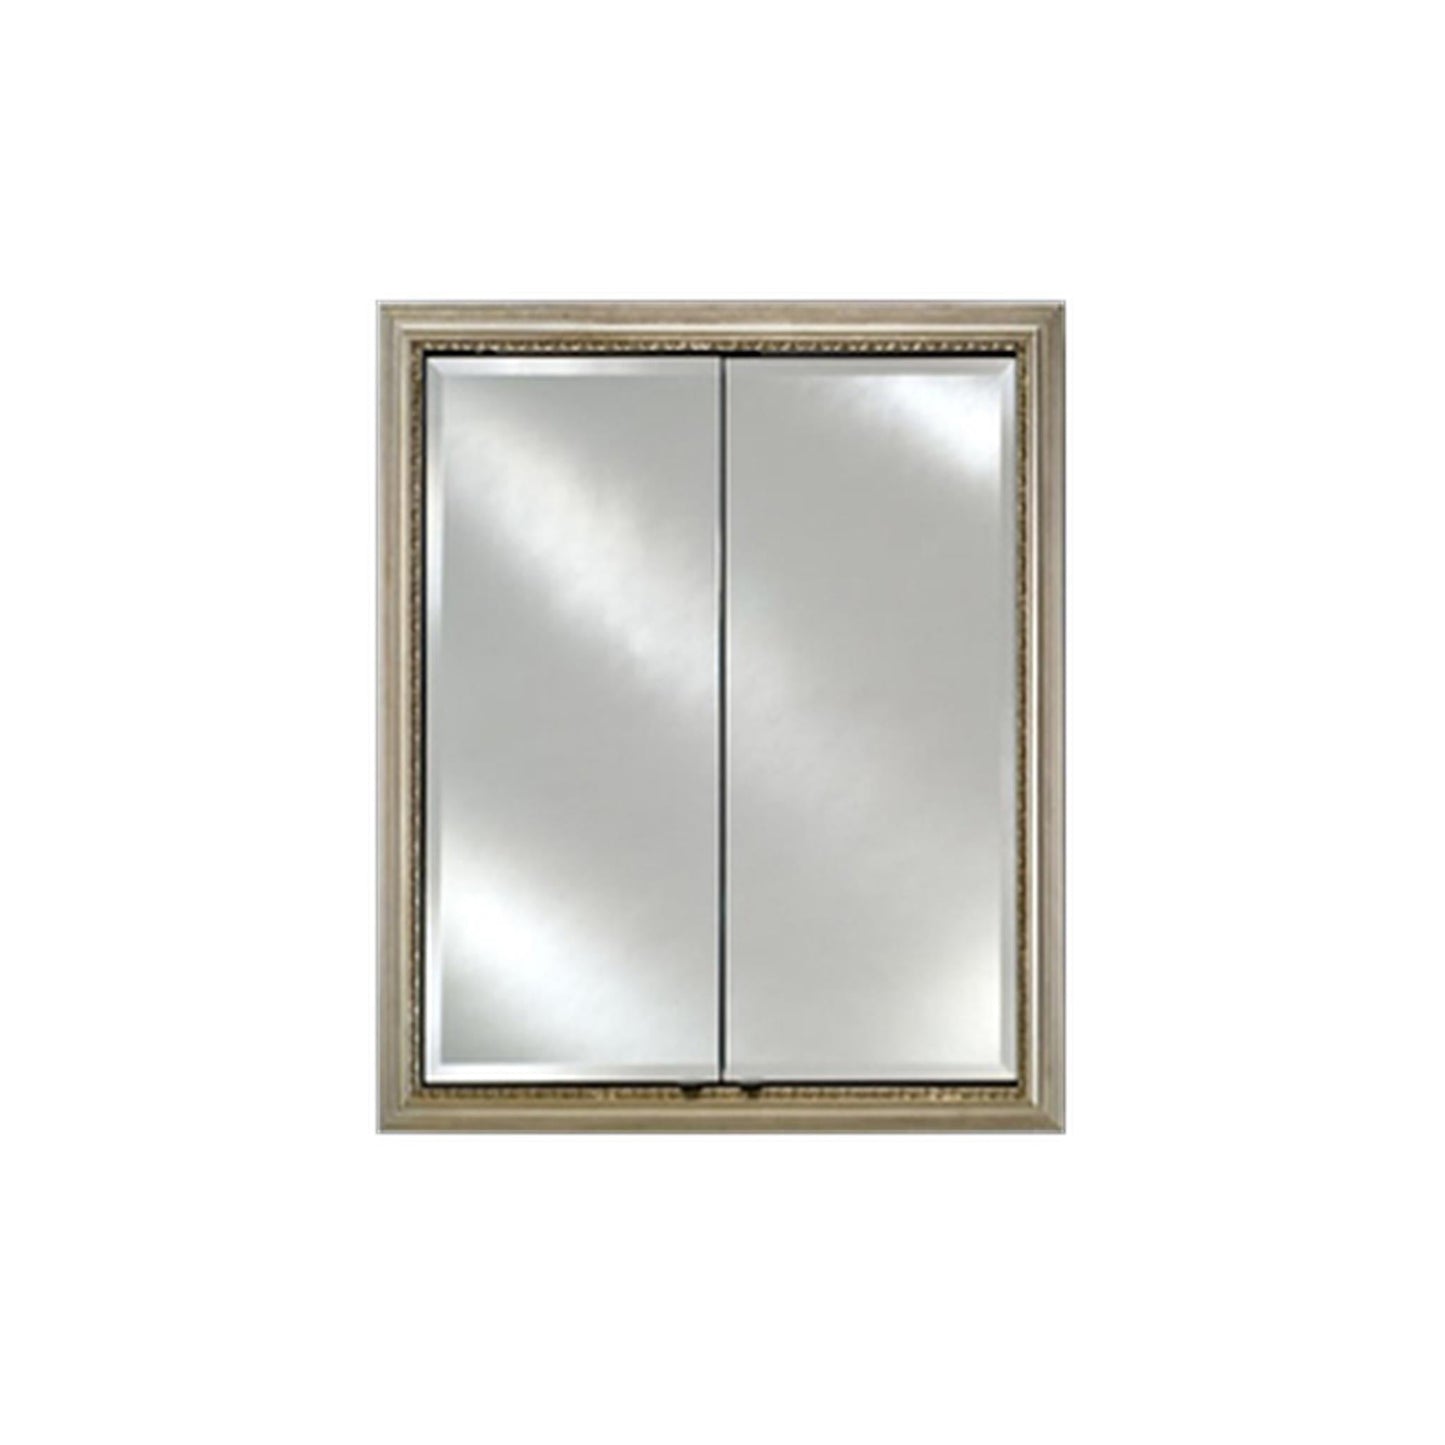 Afina Signature 33" x 23" Polished Glimmer-Flat Recessed Retro-Fit Double Door Medicine Cabinet With Beveled Edge Mirror